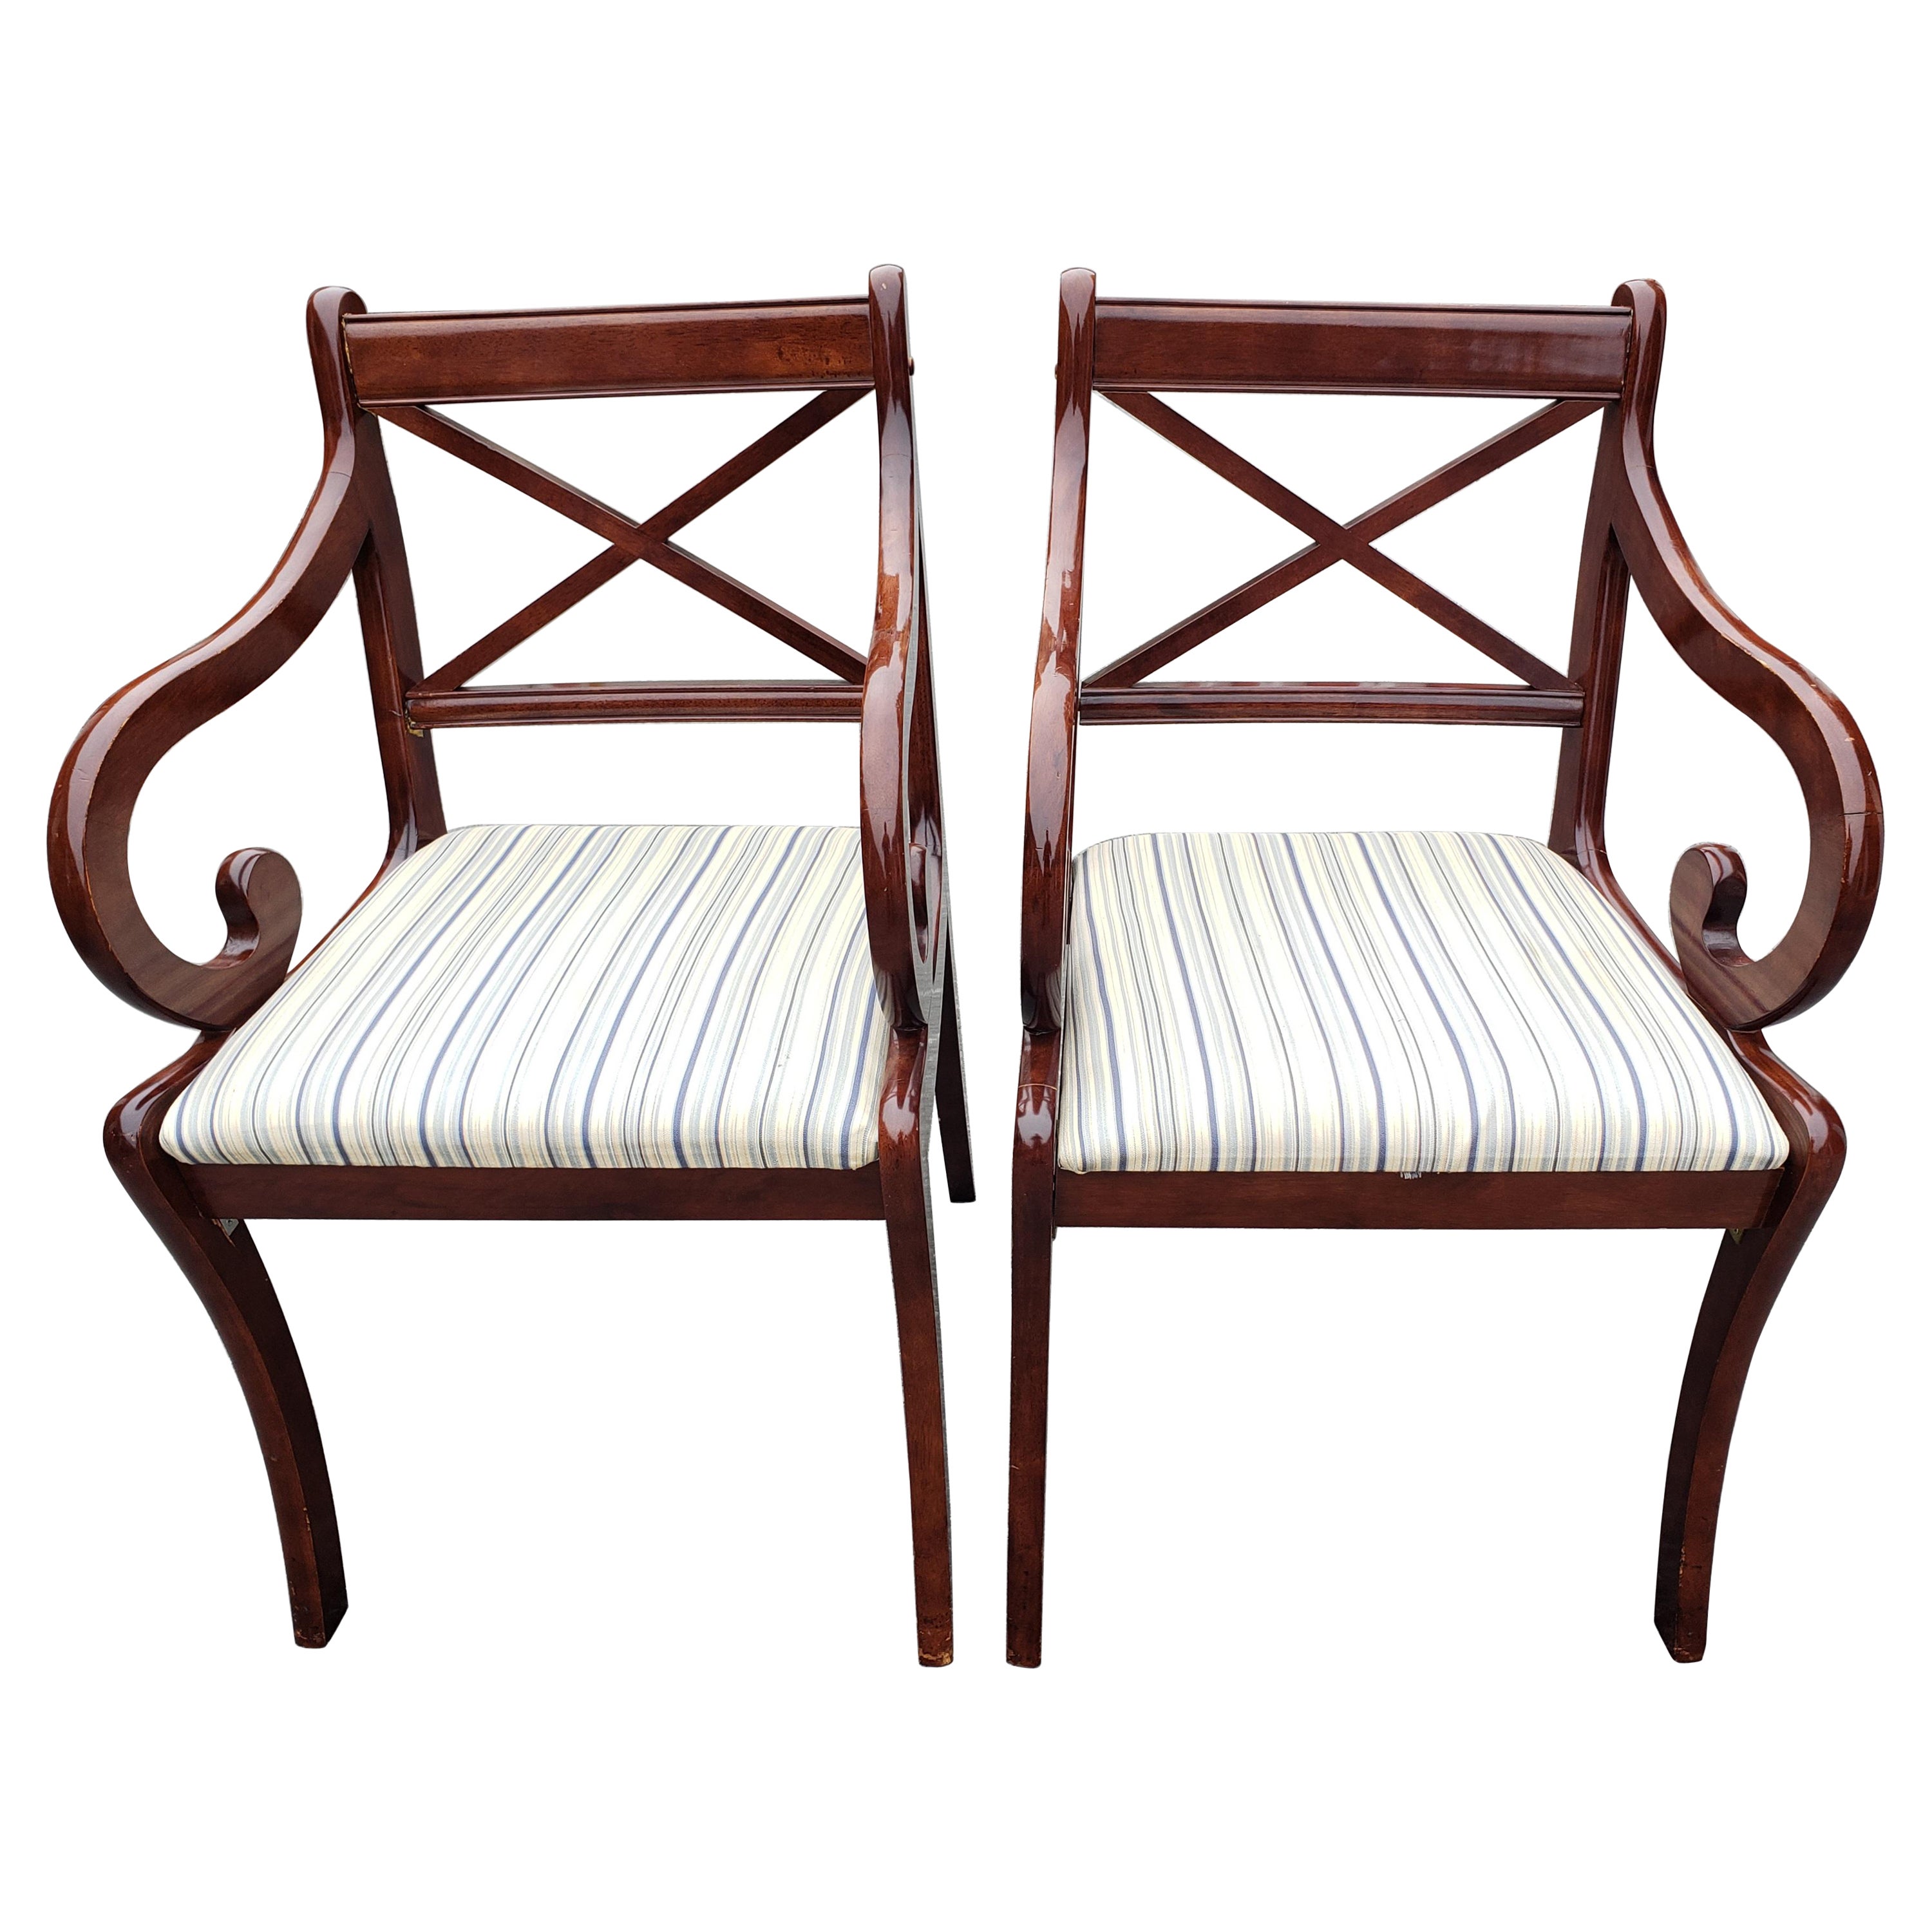 1980s Vintage Regency Mahogany Upholstered Arm Chairs, a Pair